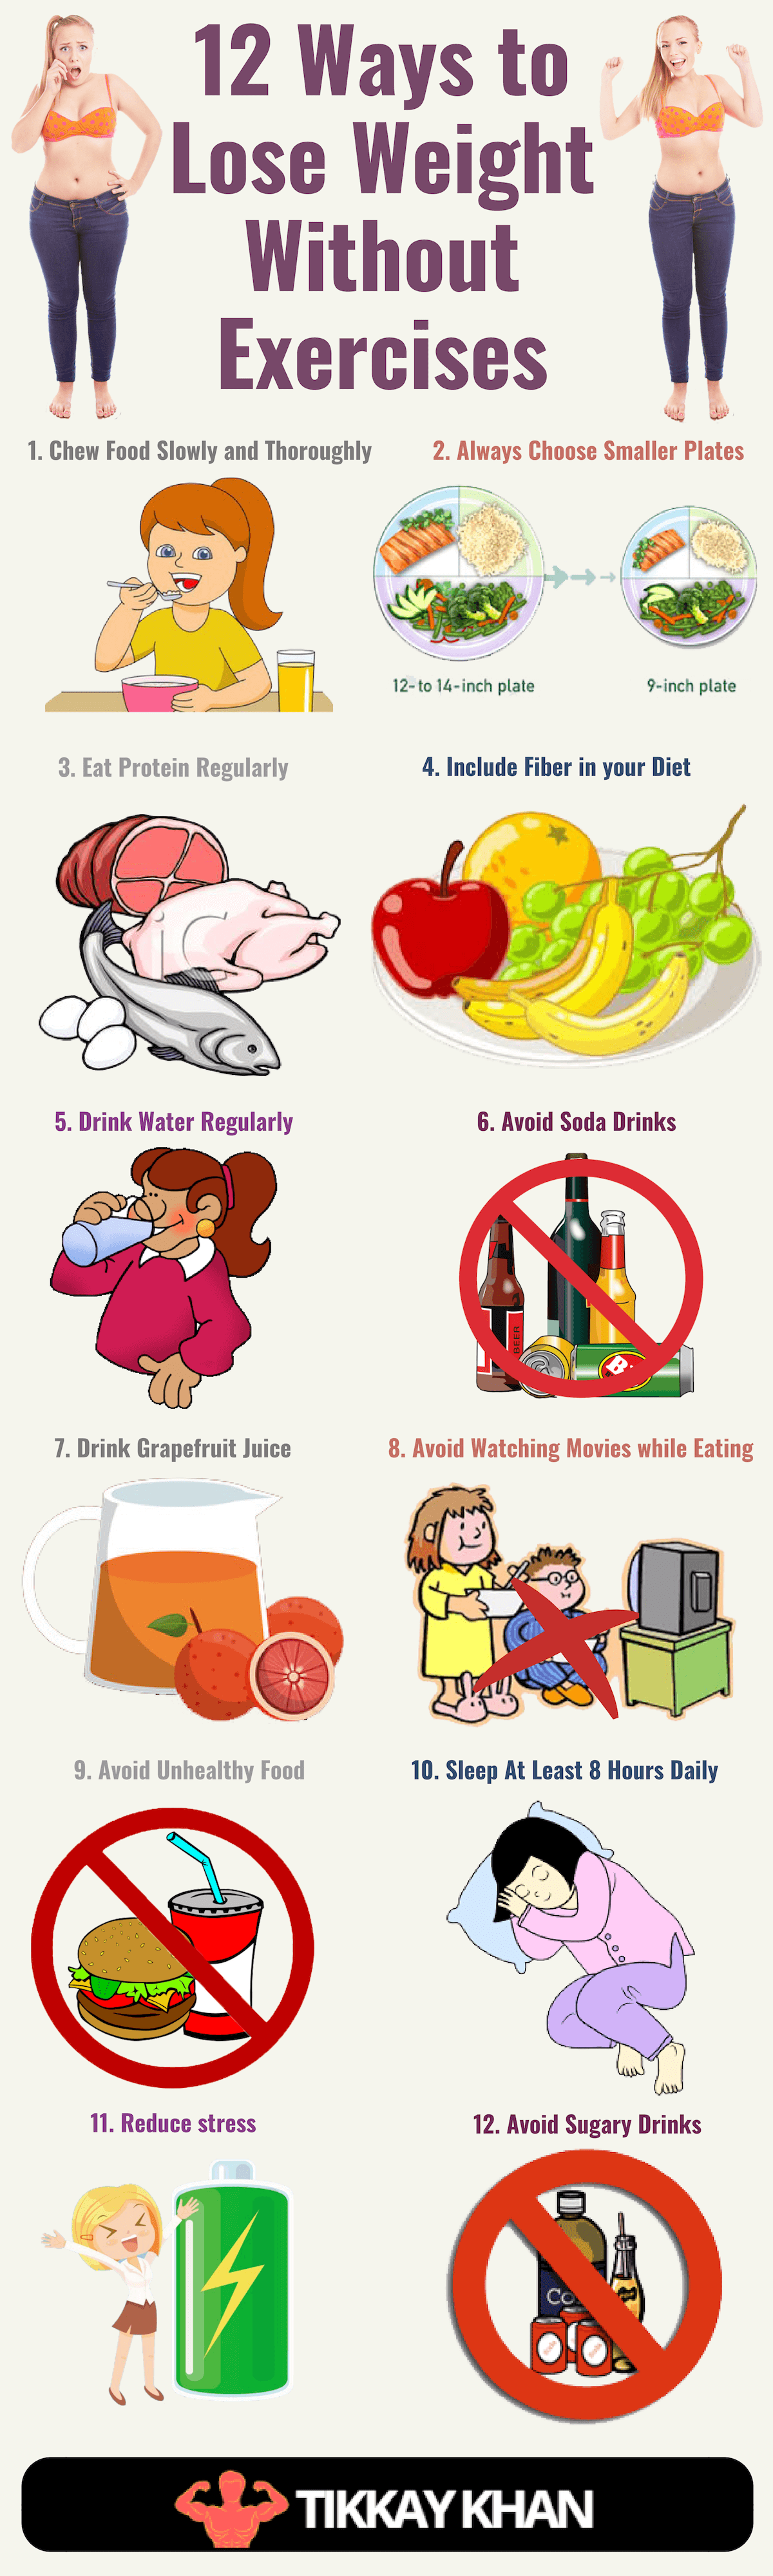 12 Ways to lose Weight without Exercises Infographic